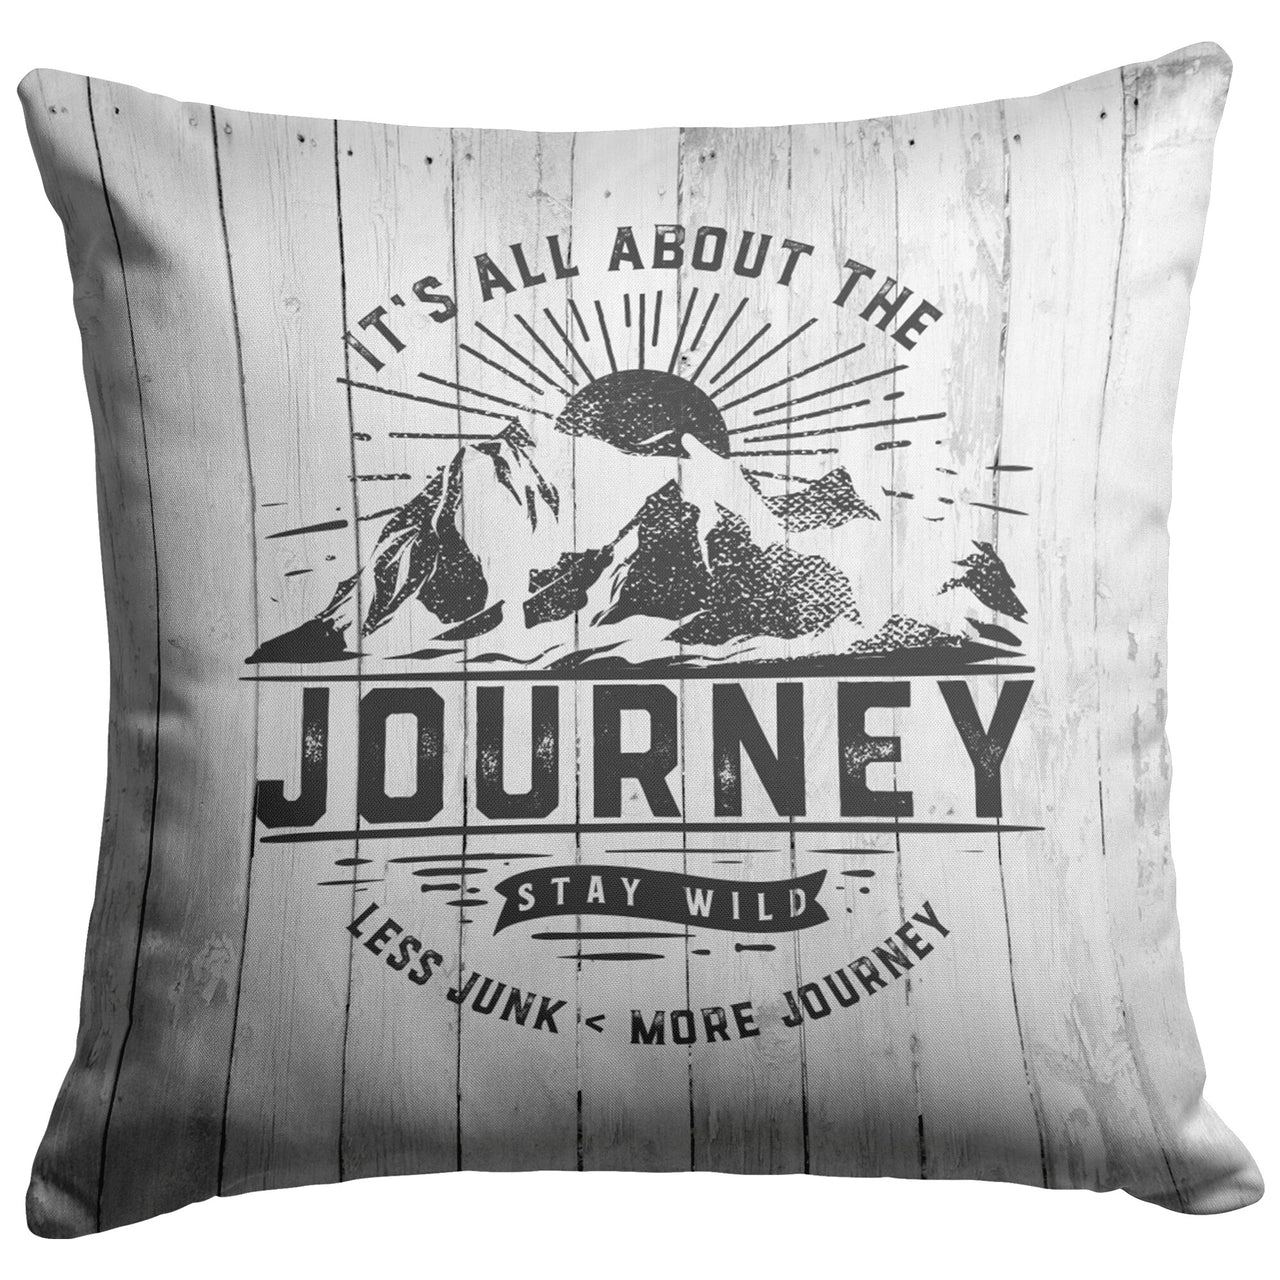 It's All About The Journey Farm Wood Pillows